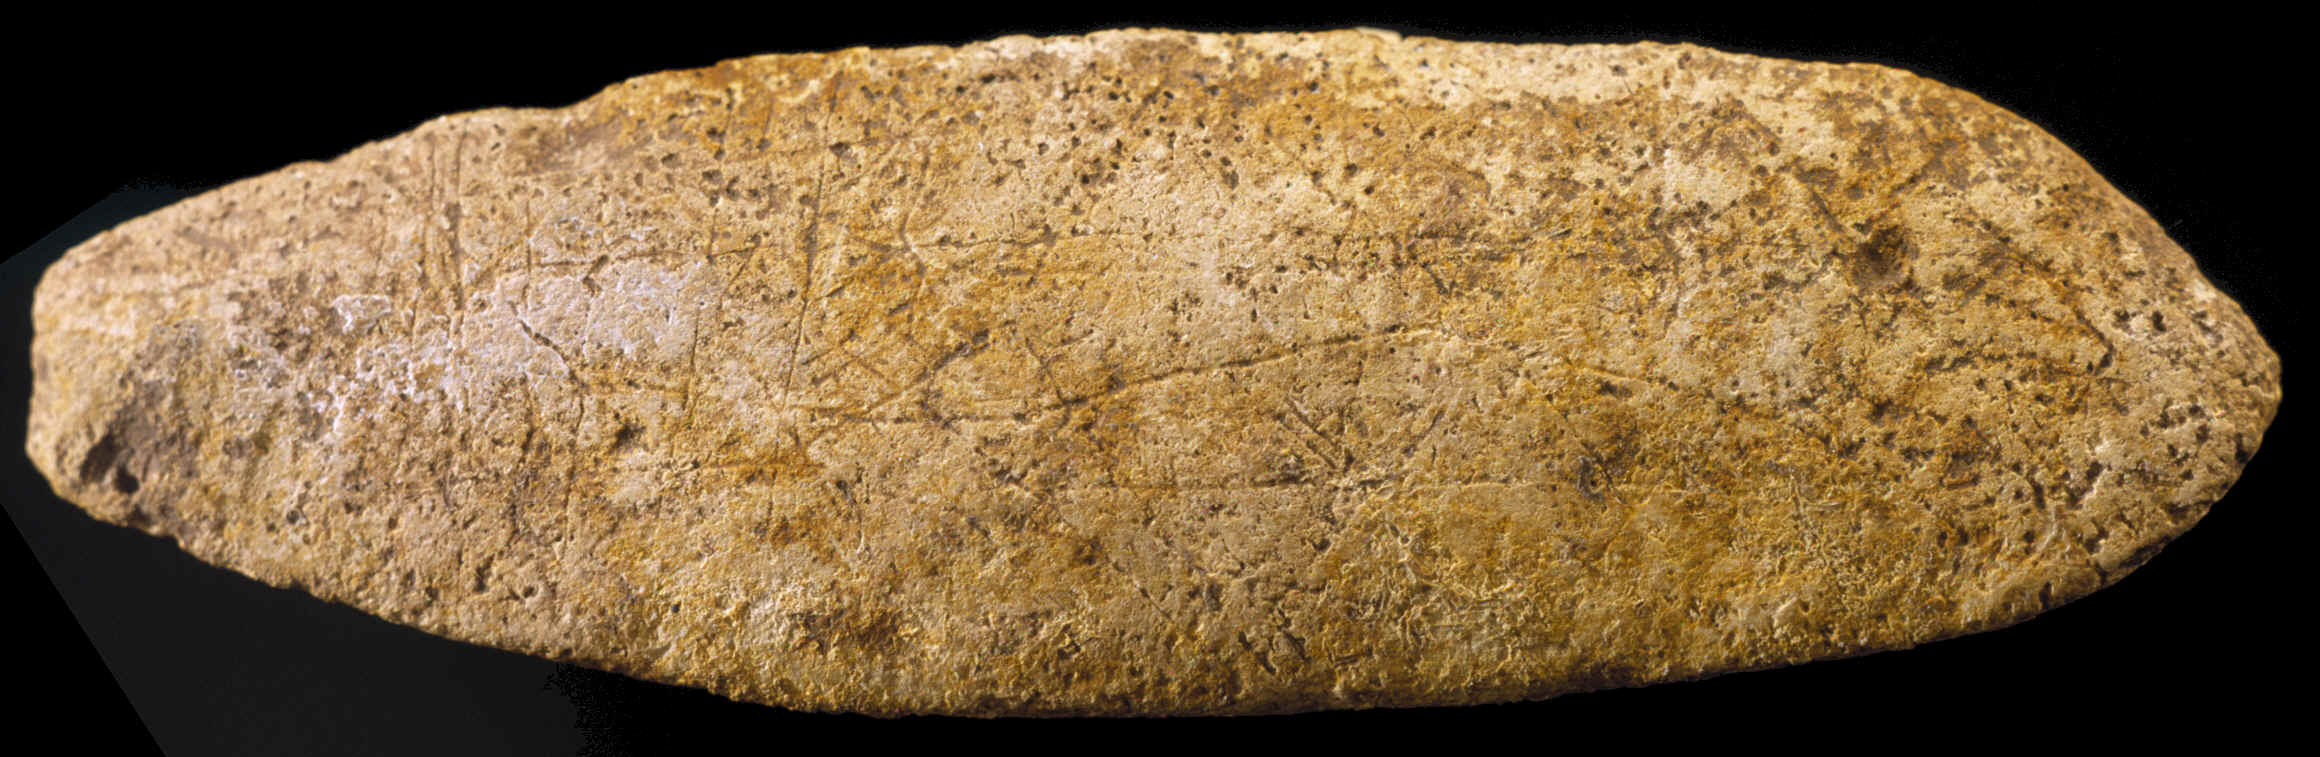 Engraved stone from the Gault site.